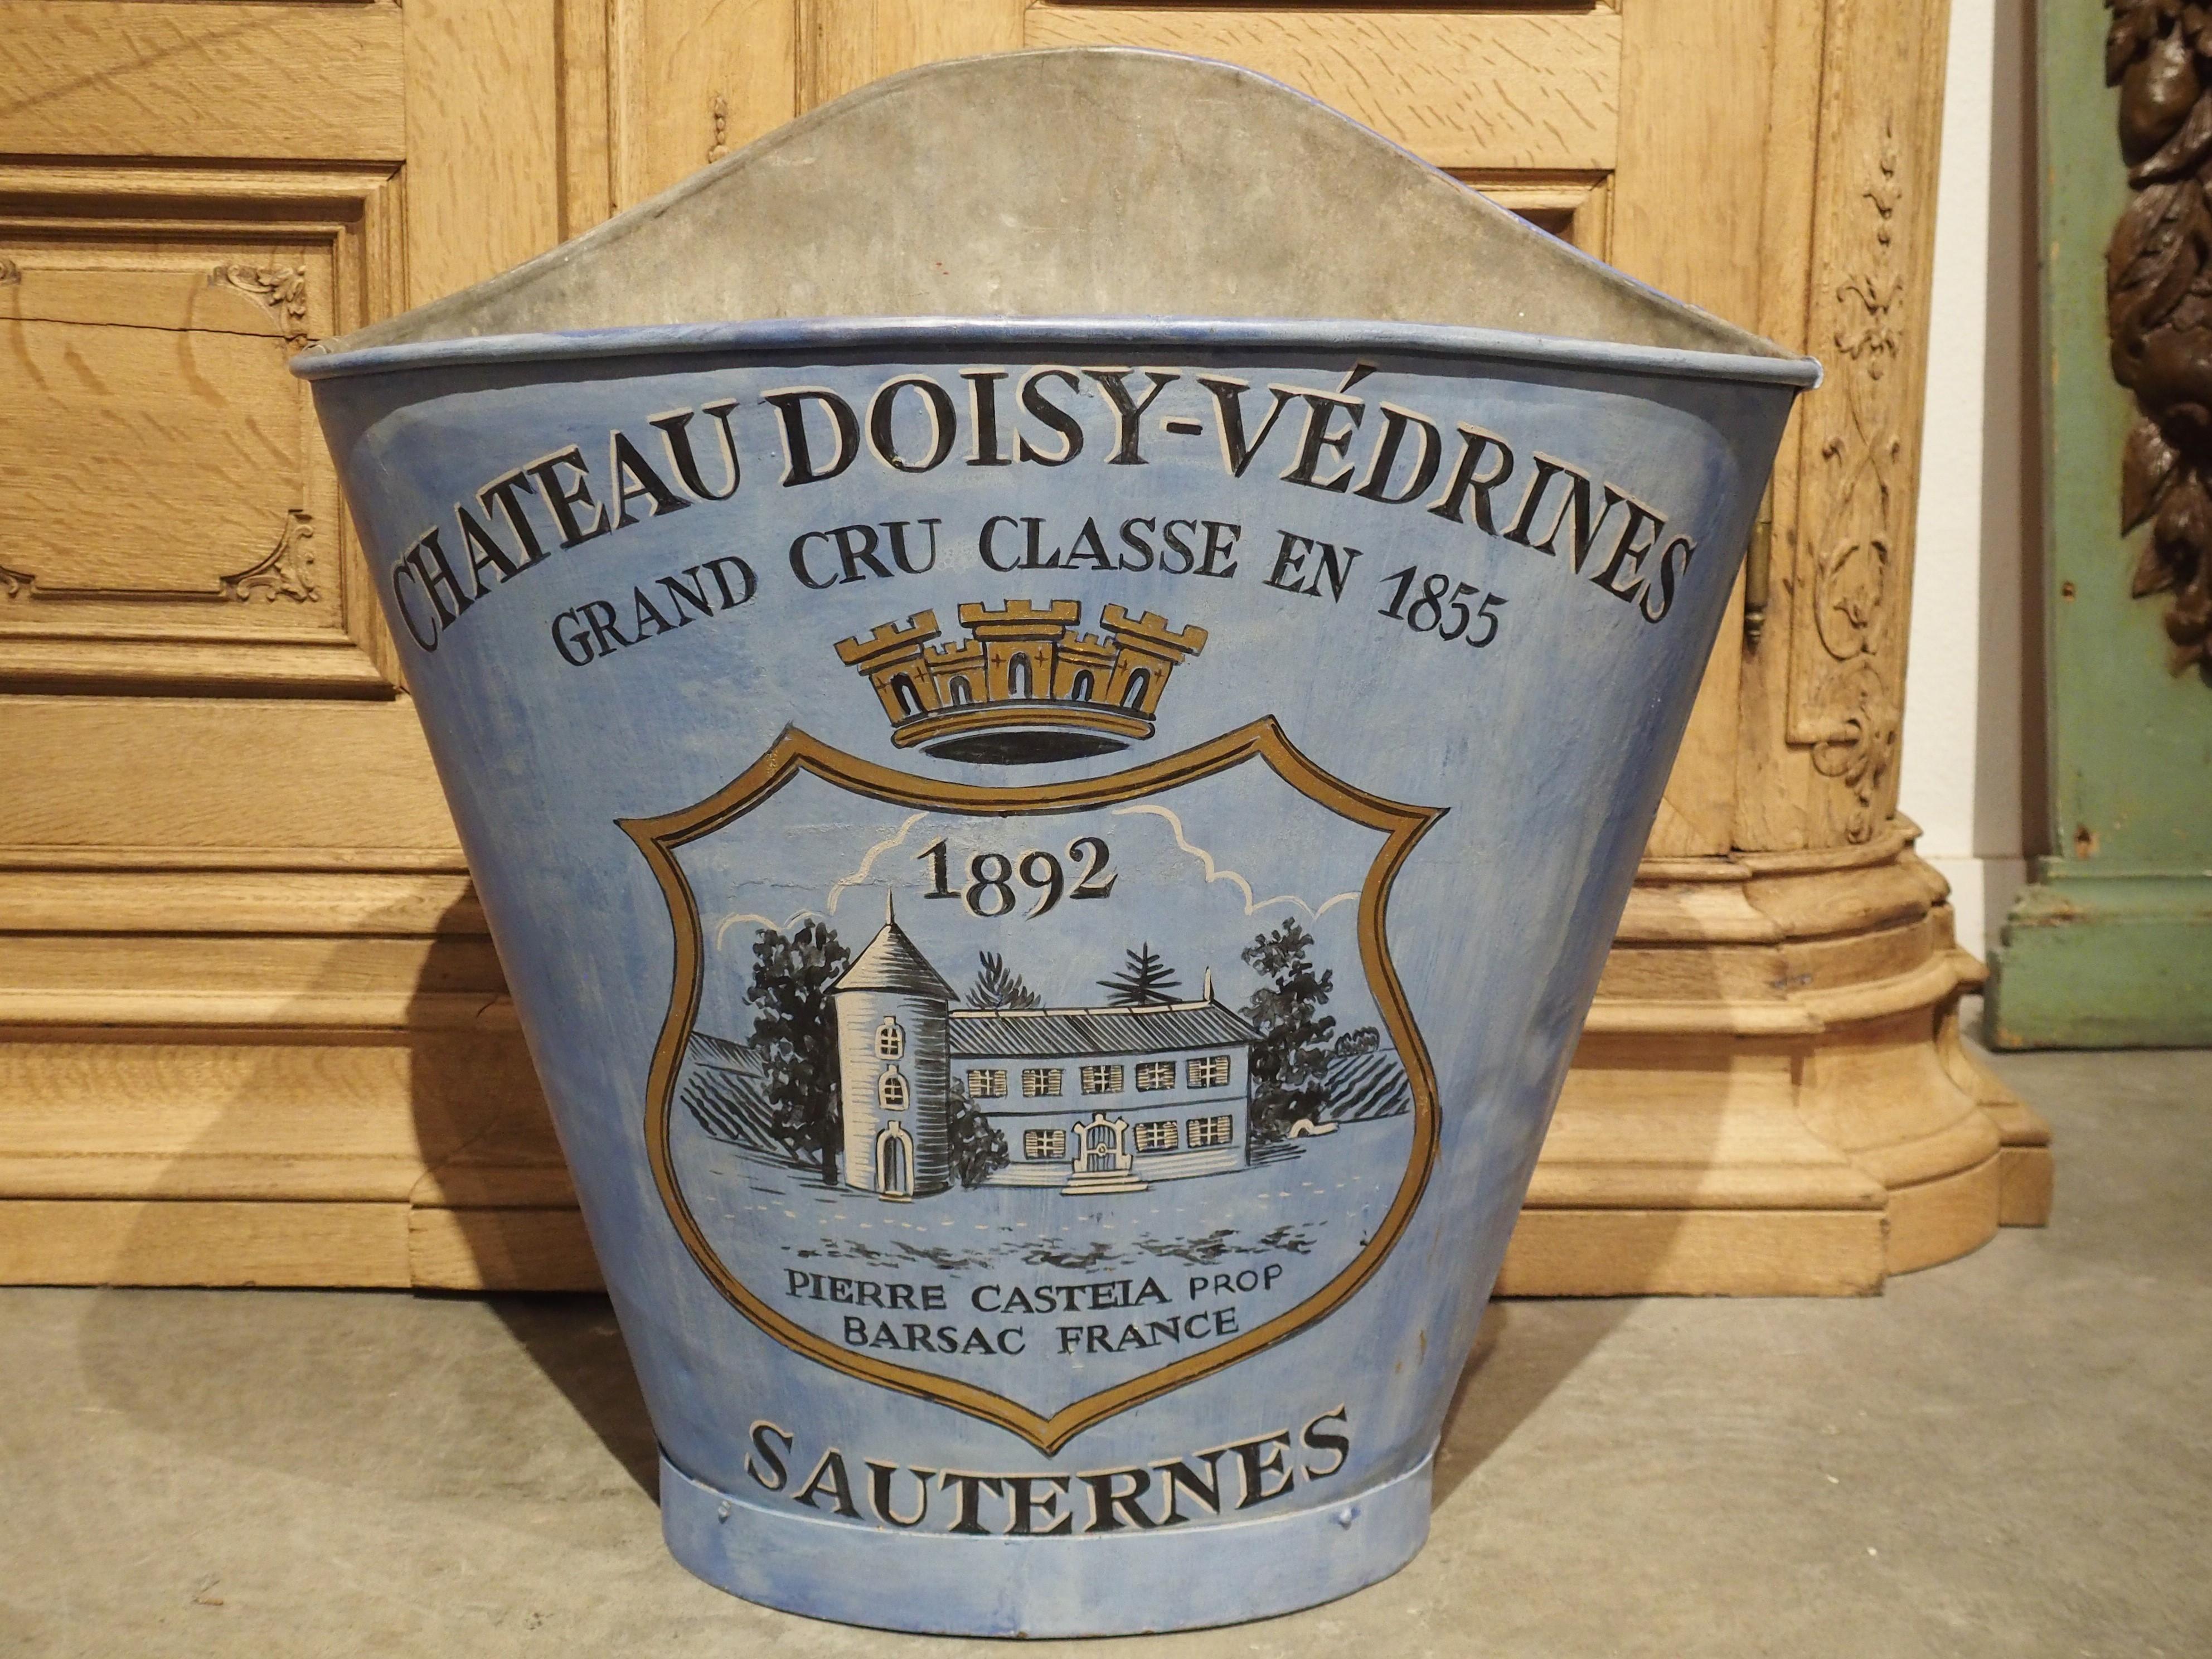 Painted French Blue Grape Hotte, “Chateau Doisy-Vedrines Sauternes” 4